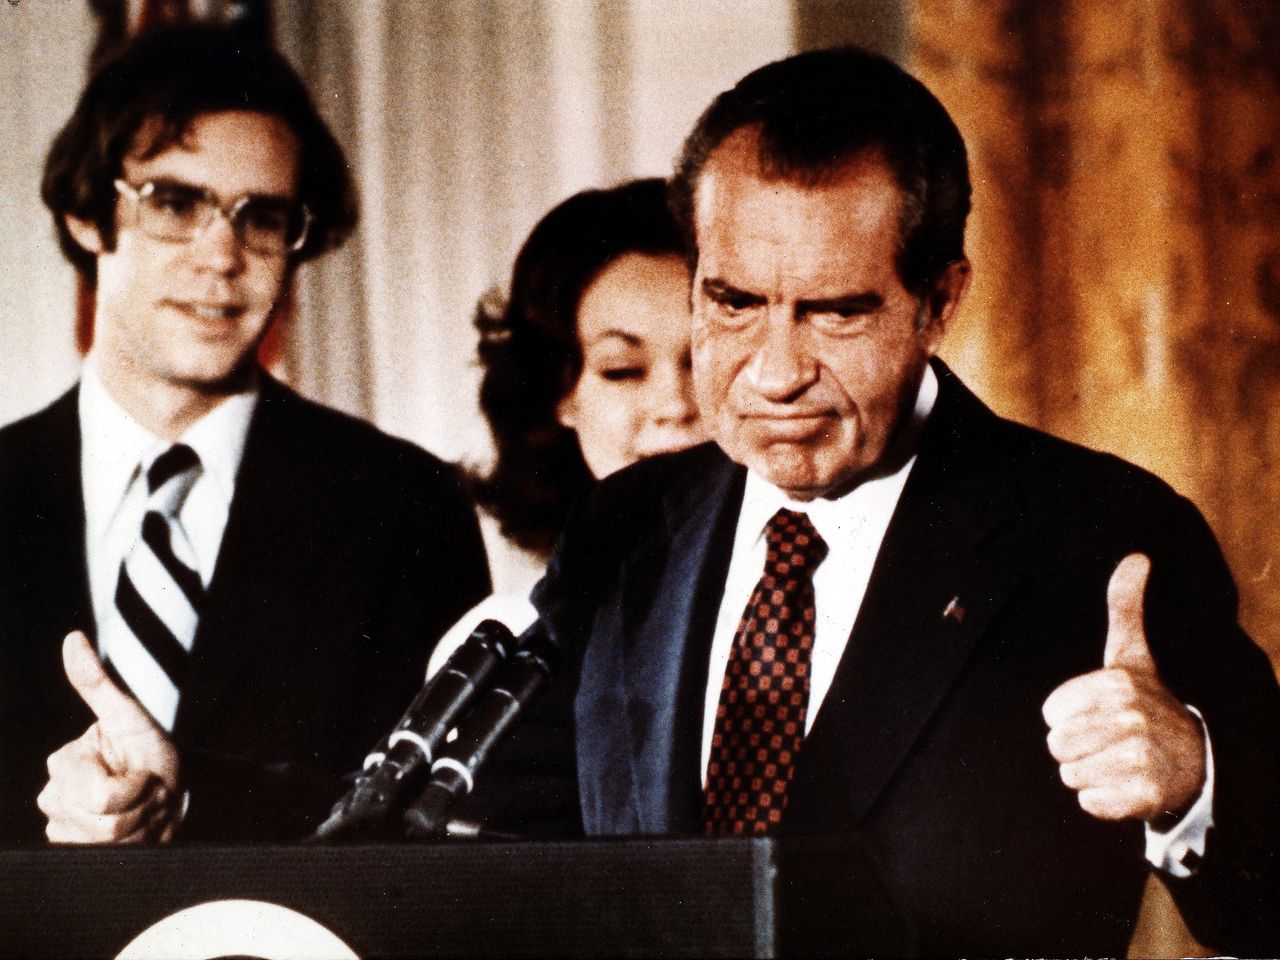 President Richard Nixon ordered his cabinet and aides to access tax returns of his political opponents.